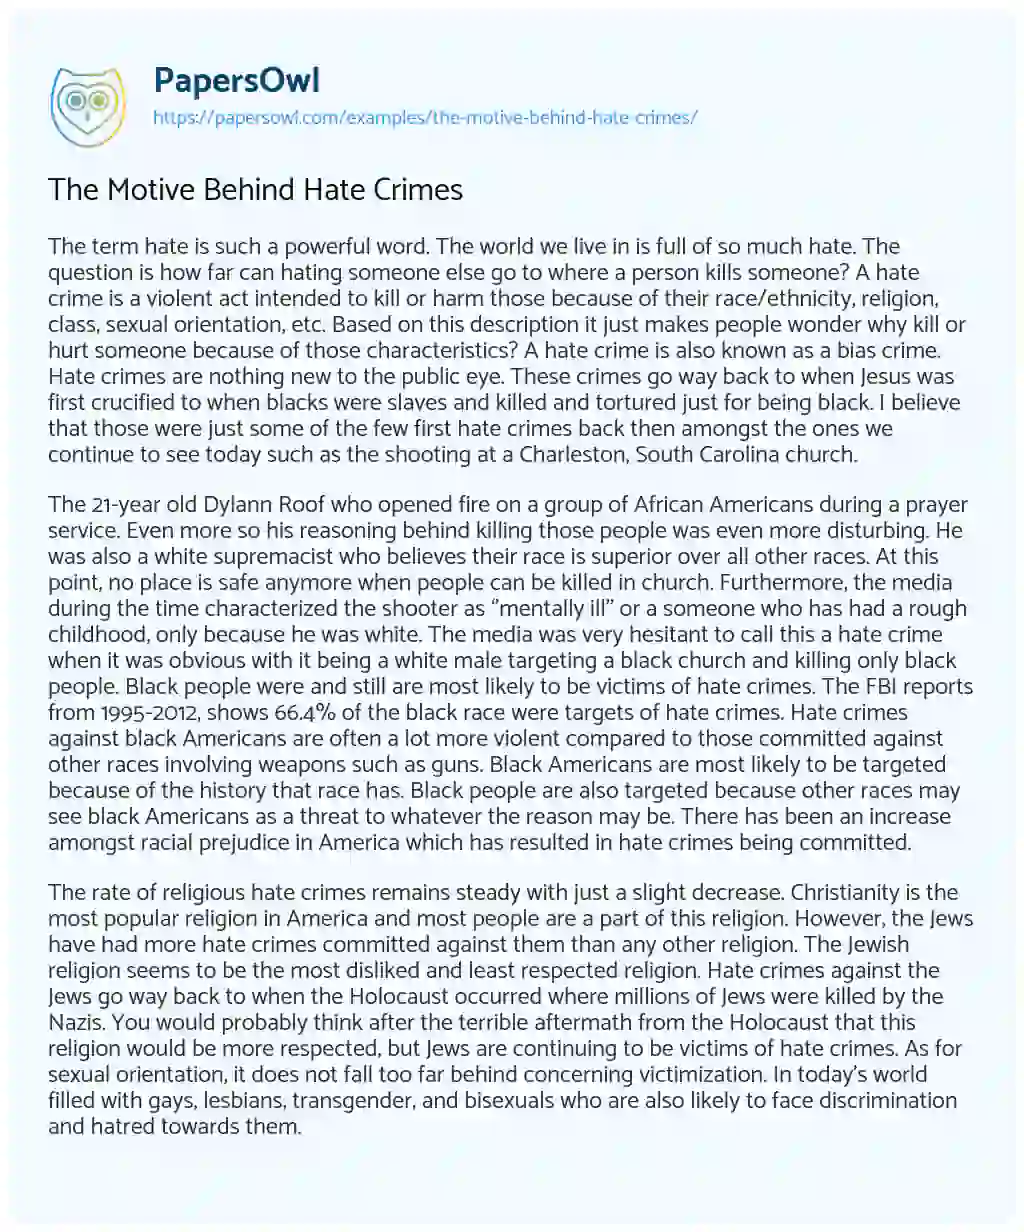 Essay on The Motive Behind Hate Crimes